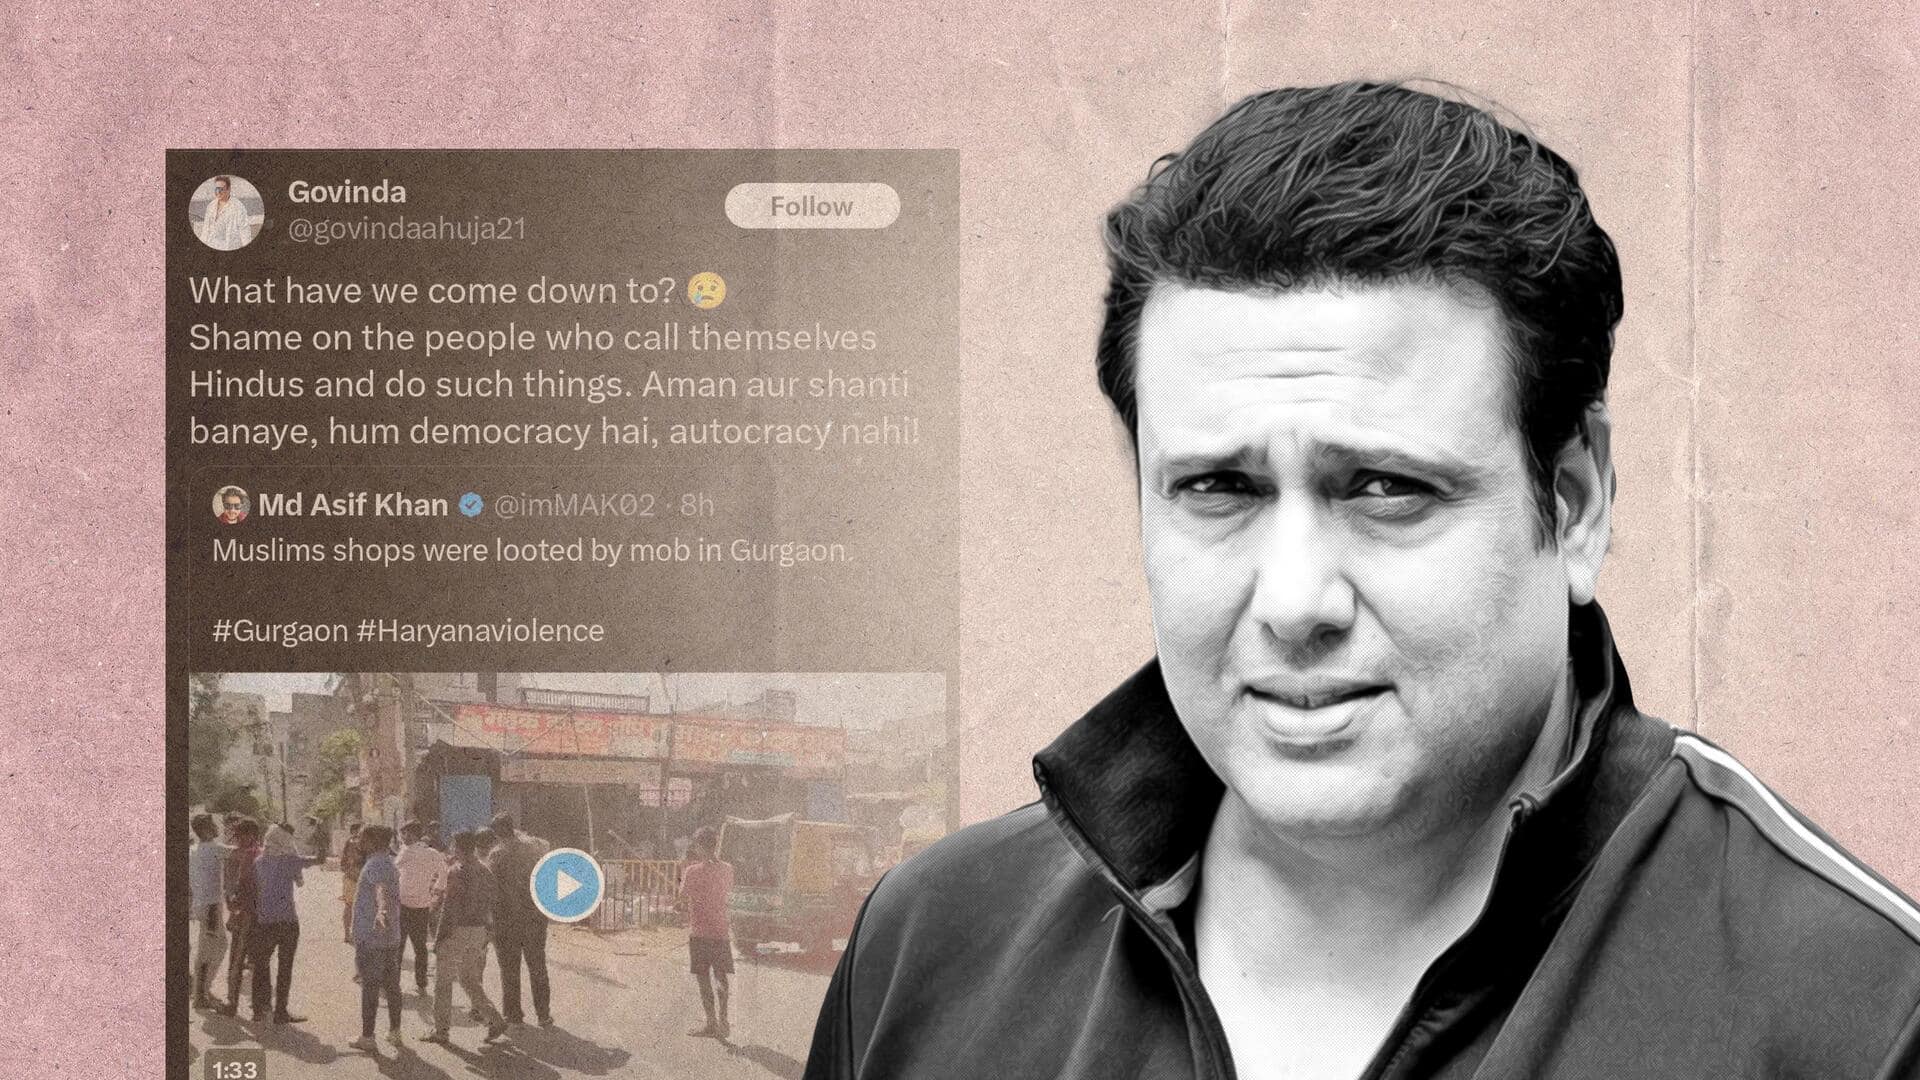 Haryana violence: Govinda clears air on now-deleted controversial tweet